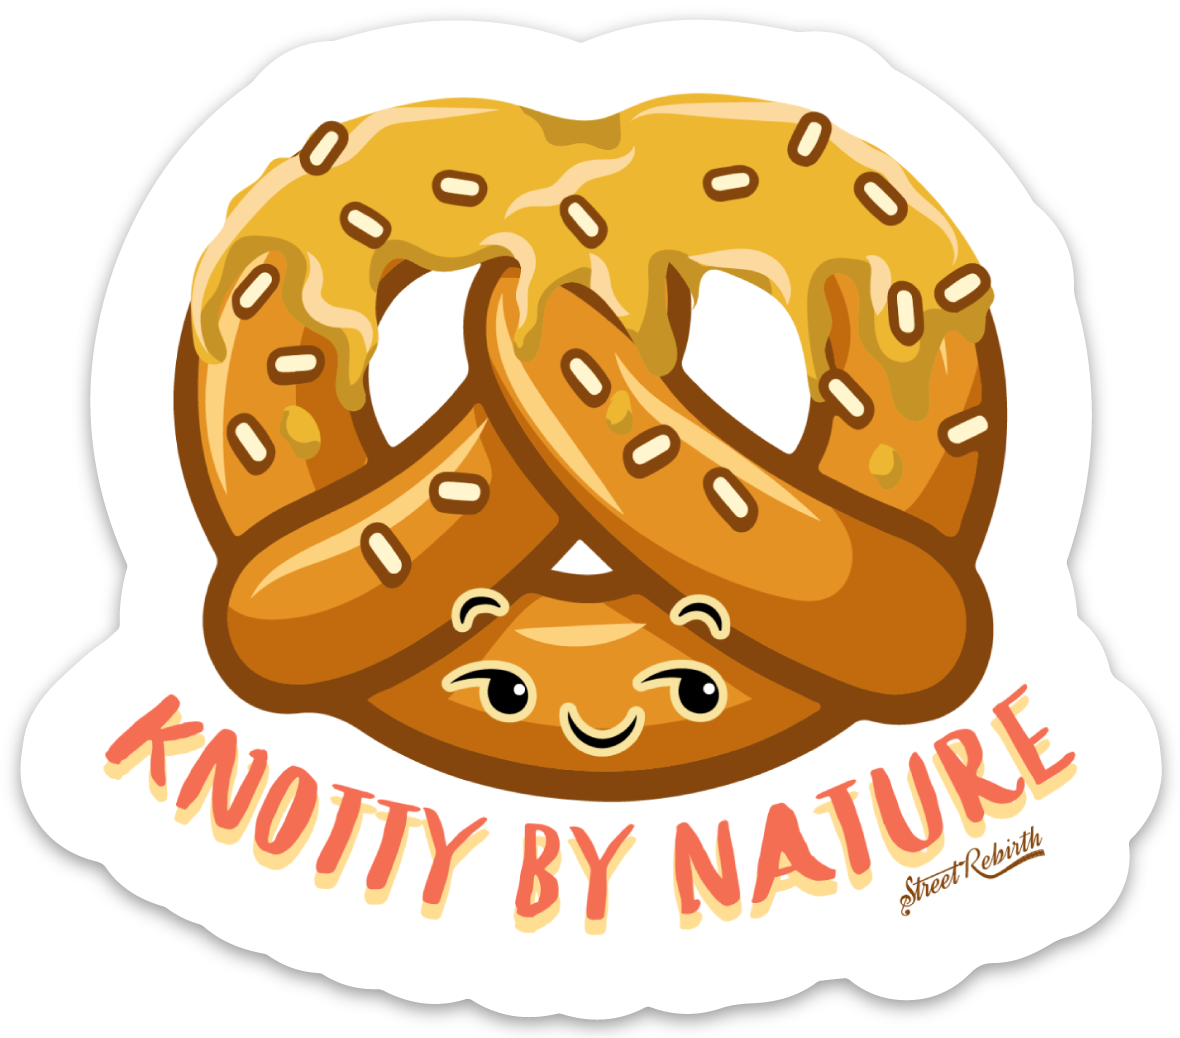 KNOTTY BY NATURE PUN STICKER – ONE 4 INCH WATER PROOF VINYL STICKER – FOR HYDRO FLASK, SKATEBOARD, LAPTOP, PLANNER, CAR, COLLECTING, GIFTING